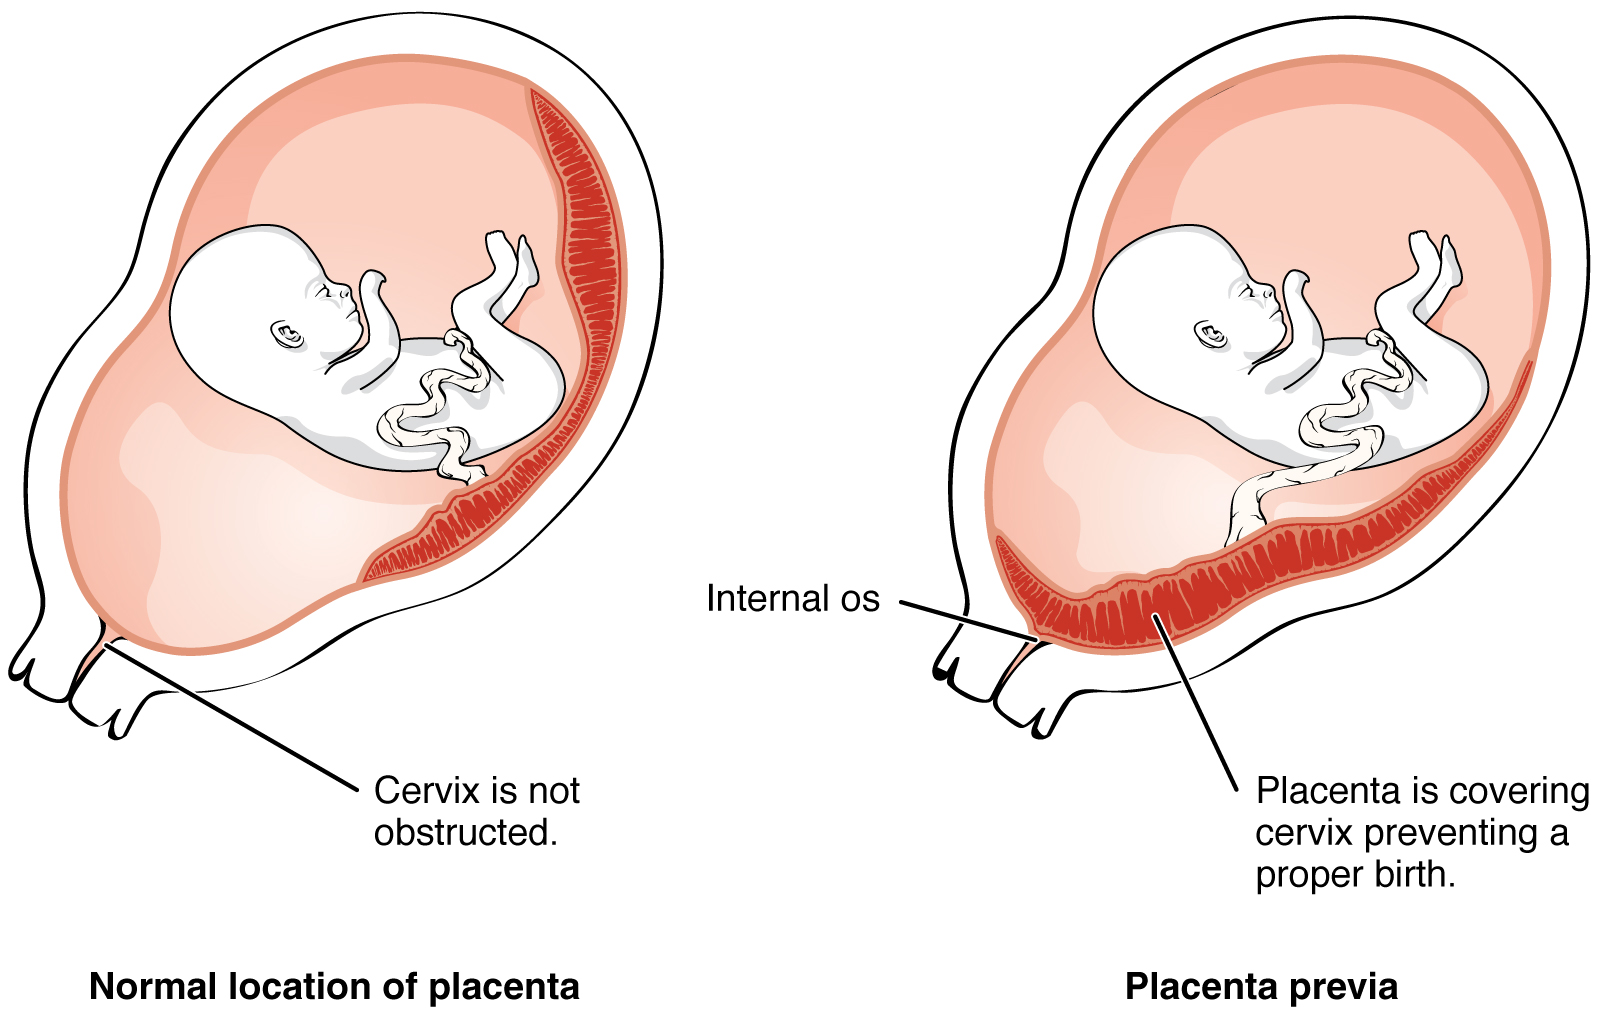 The left panel of this image shows the normal location of the placenta and the right panel shows the location of the placenta in placenta previa.